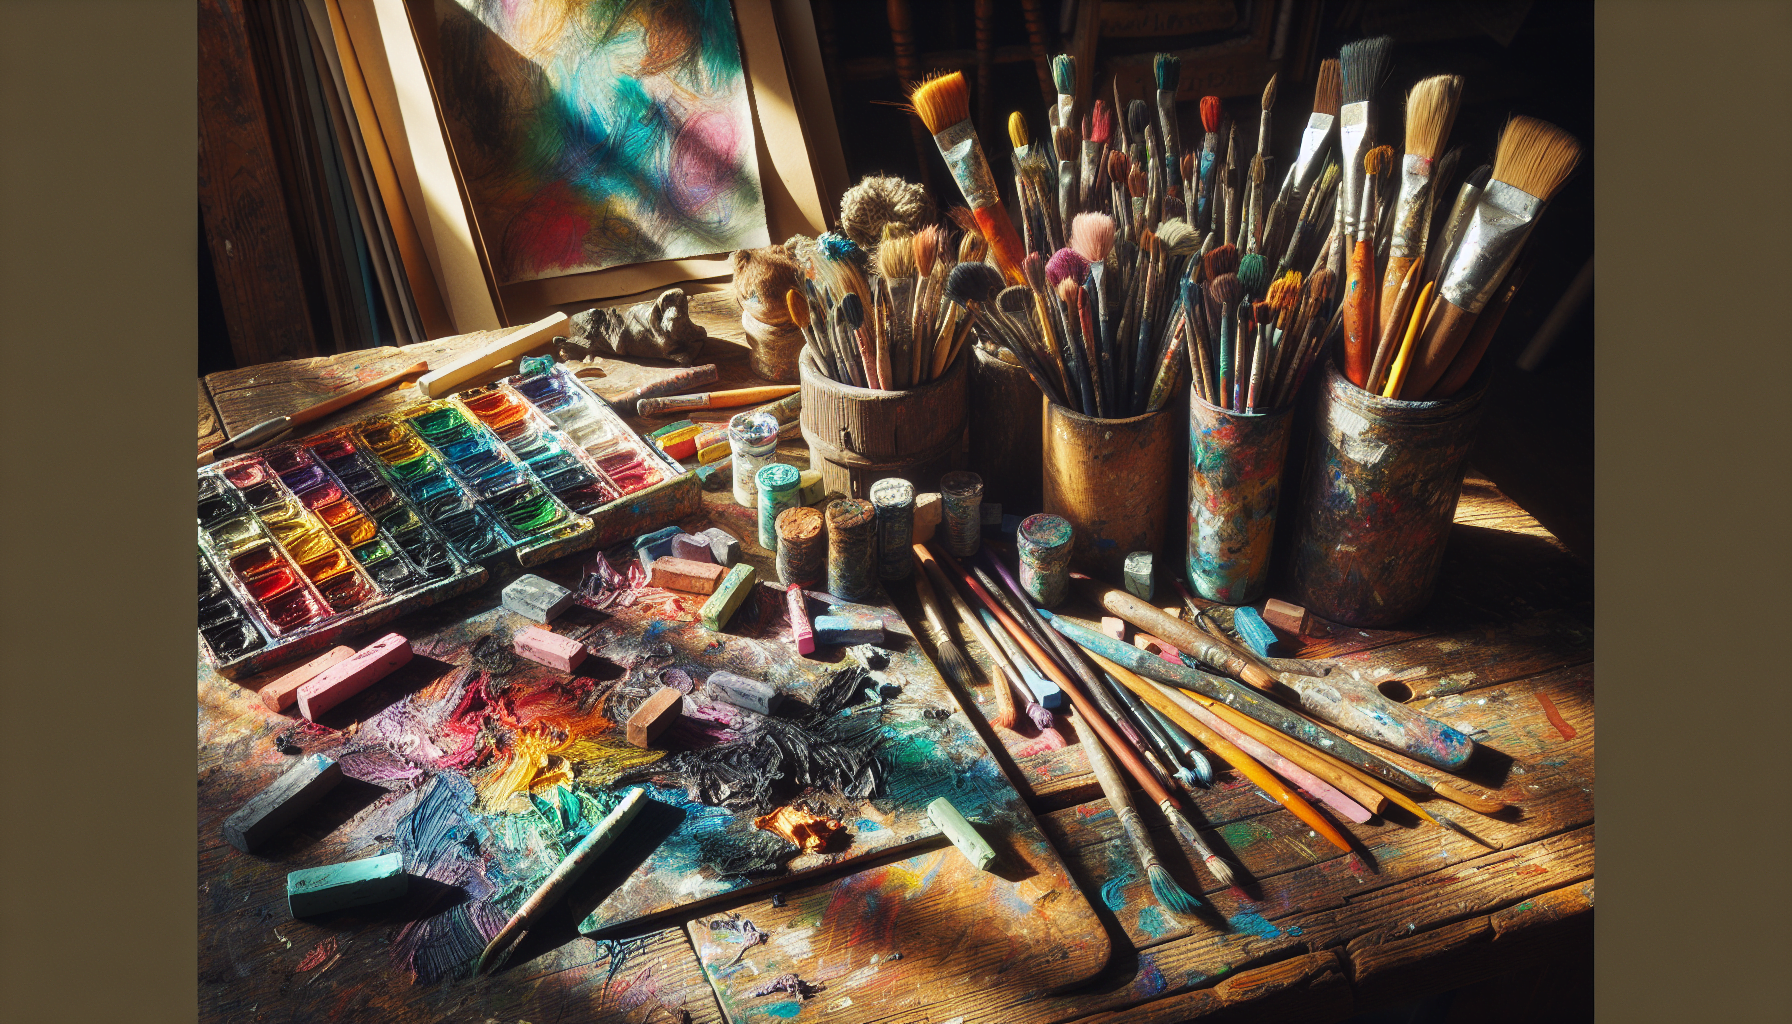 Diverse art supplies and tools in a creative workspace